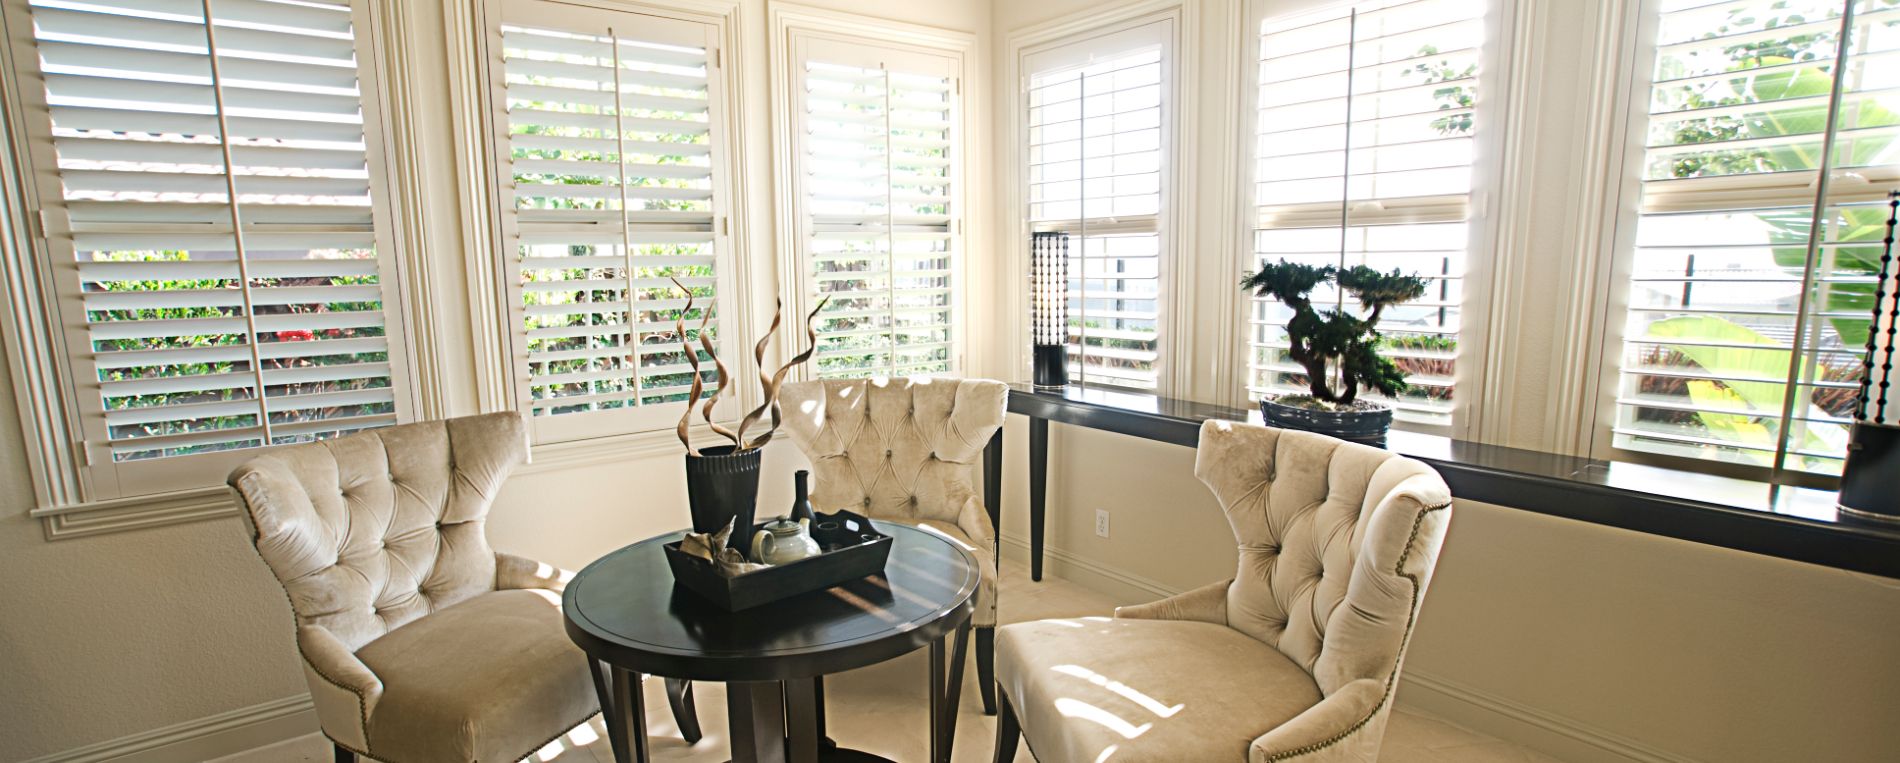 Pleated Roman Shades For Richmond Living Room